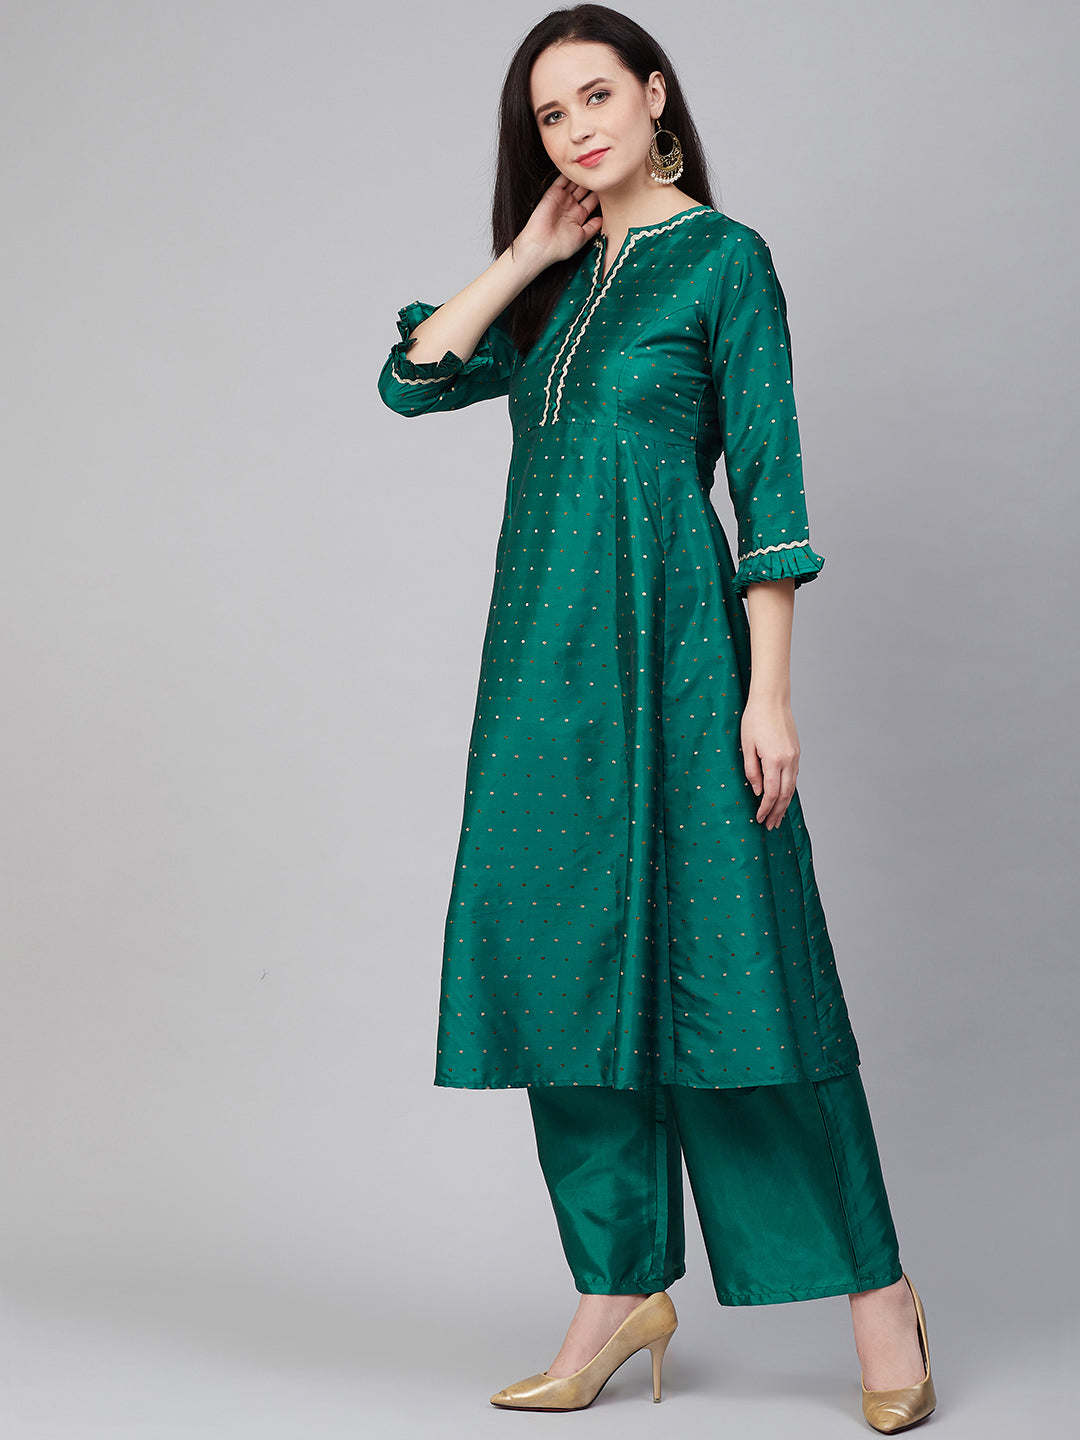 Women's Green And Golden Woven Design Kurta With Palazzos - Bhama Couture